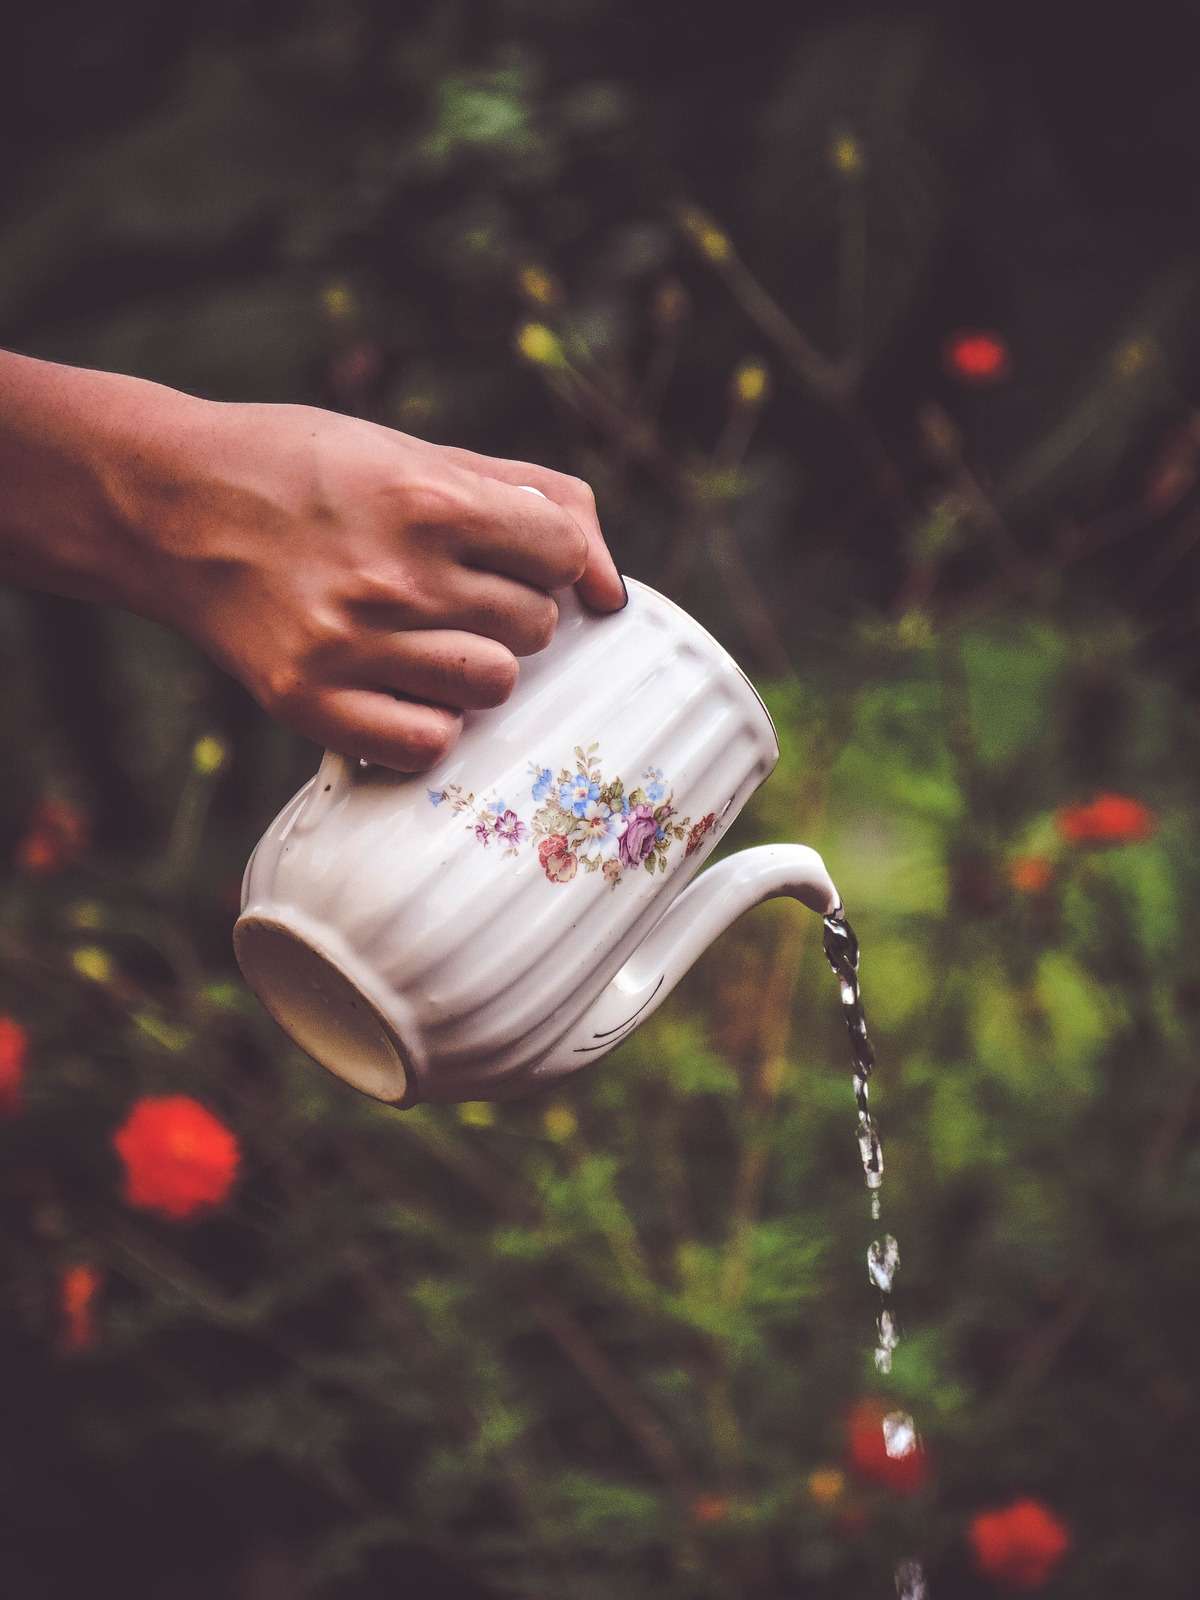 Gardening Selective Focus Photography of Person Holding White and Floral Teapot